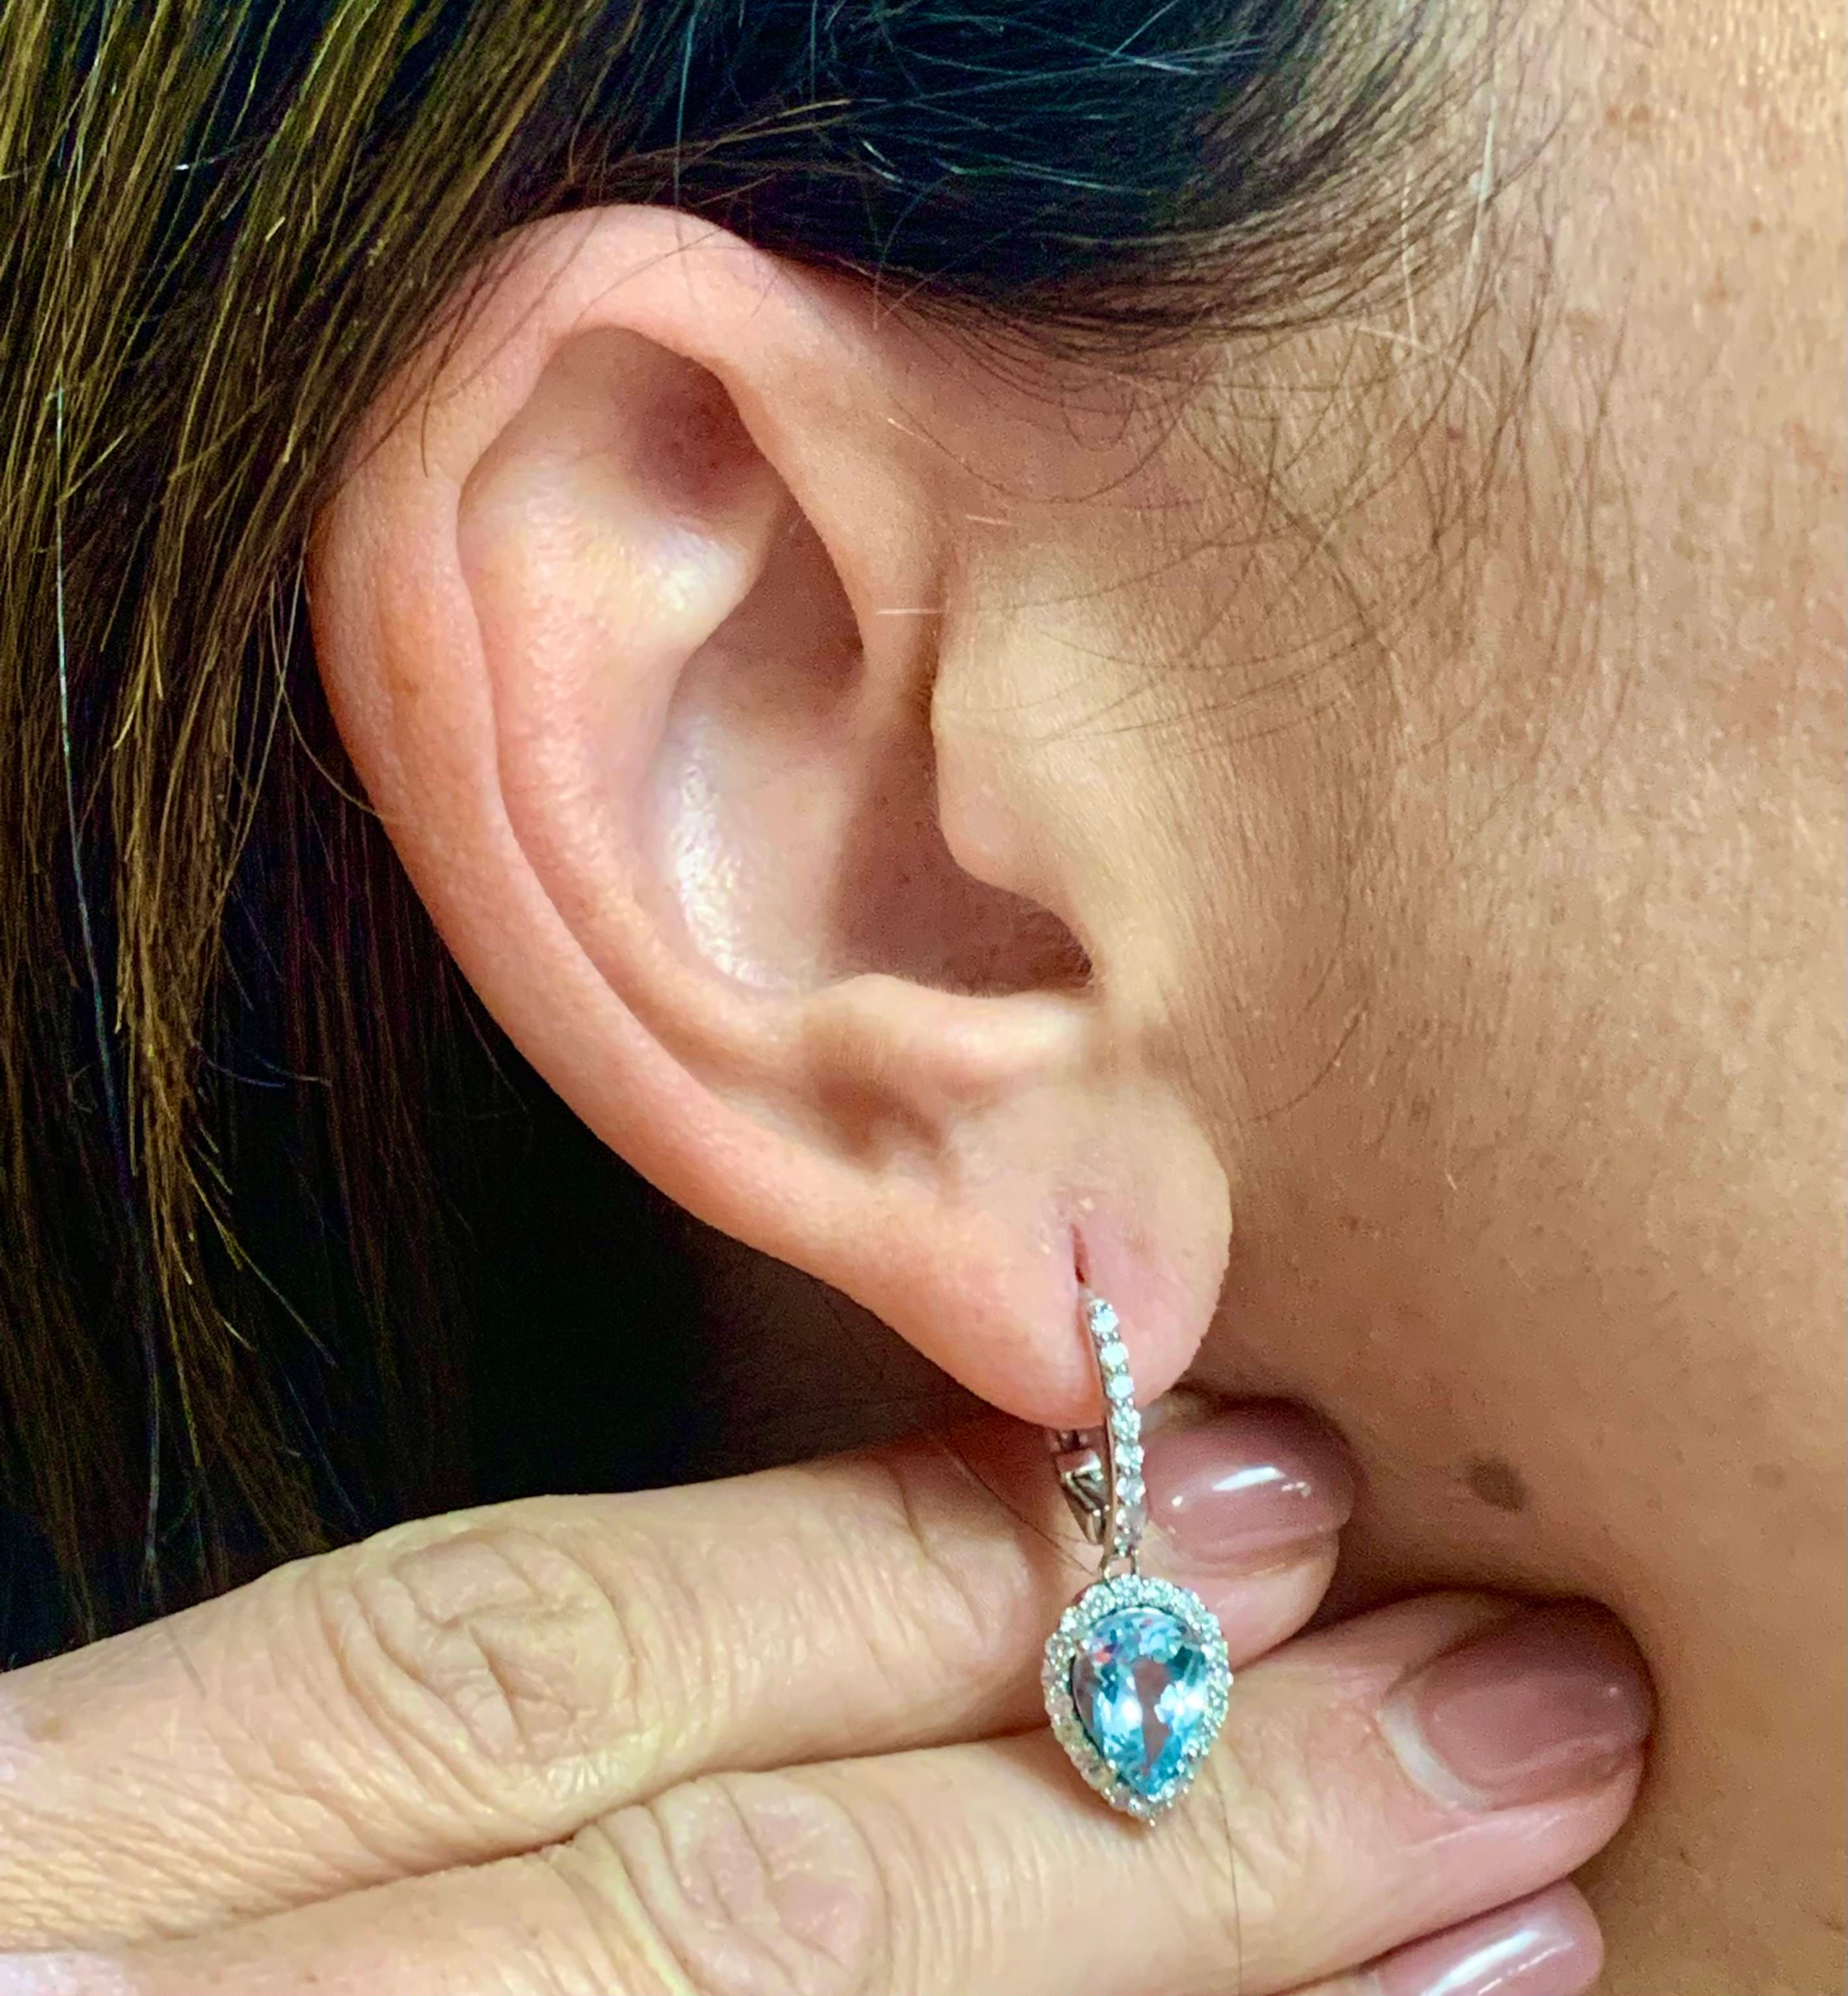 Natural Finely Faceted Quality Aquamarine Diamond Earrings 14k Gold 3.61 TCW Certified $5,950 118916

Please look at the video attached for this item. With the video you can see the movement of the item and appreciate the faceting and details